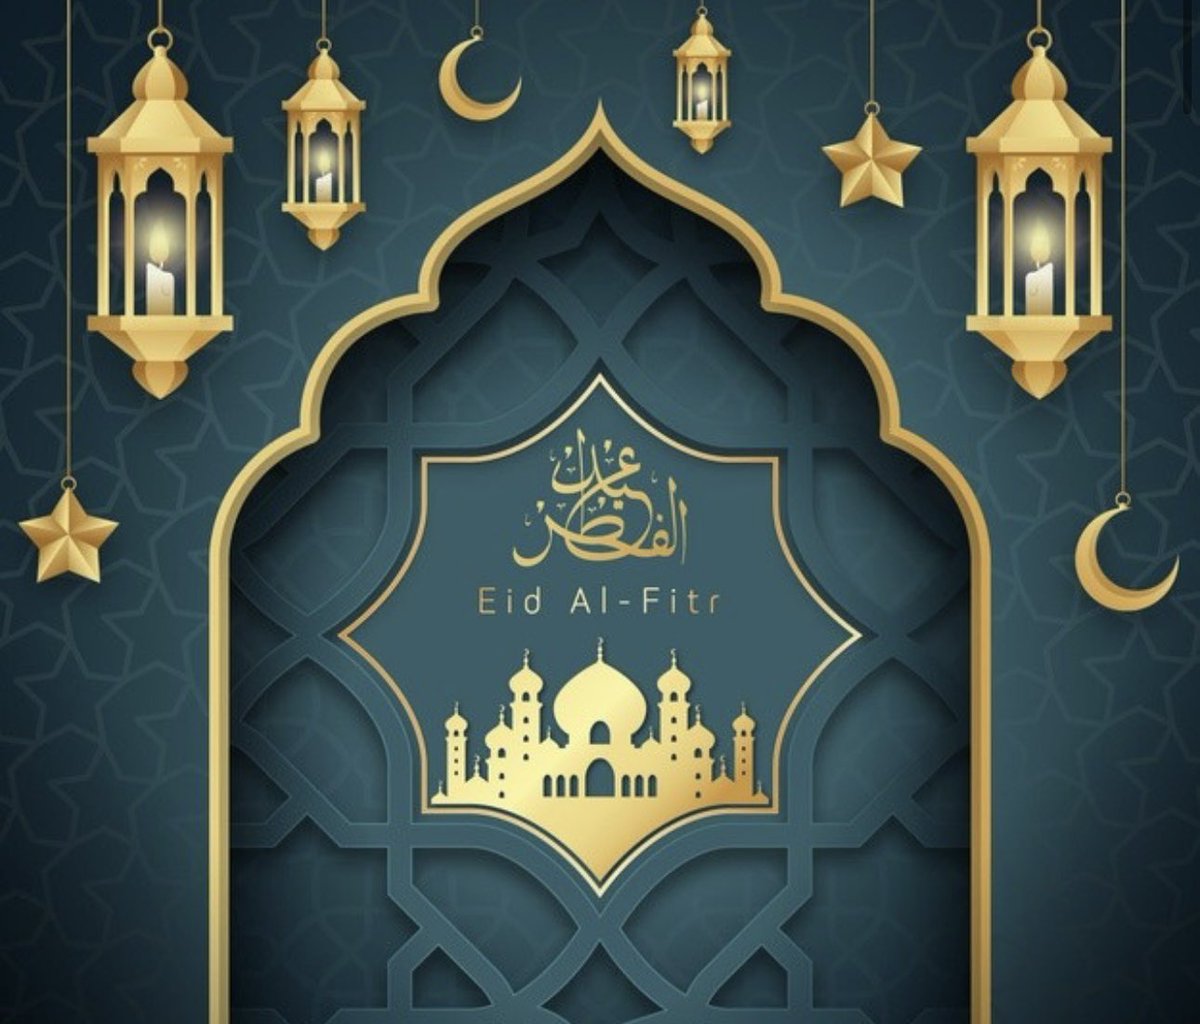 🌙✨Eid Mubarak! ✨🌙 May you always be filled with the light and sparkle of the moon that rises on Eid!✨ @literacy_fox @DOEChancellor @D27NYC @PS60queens